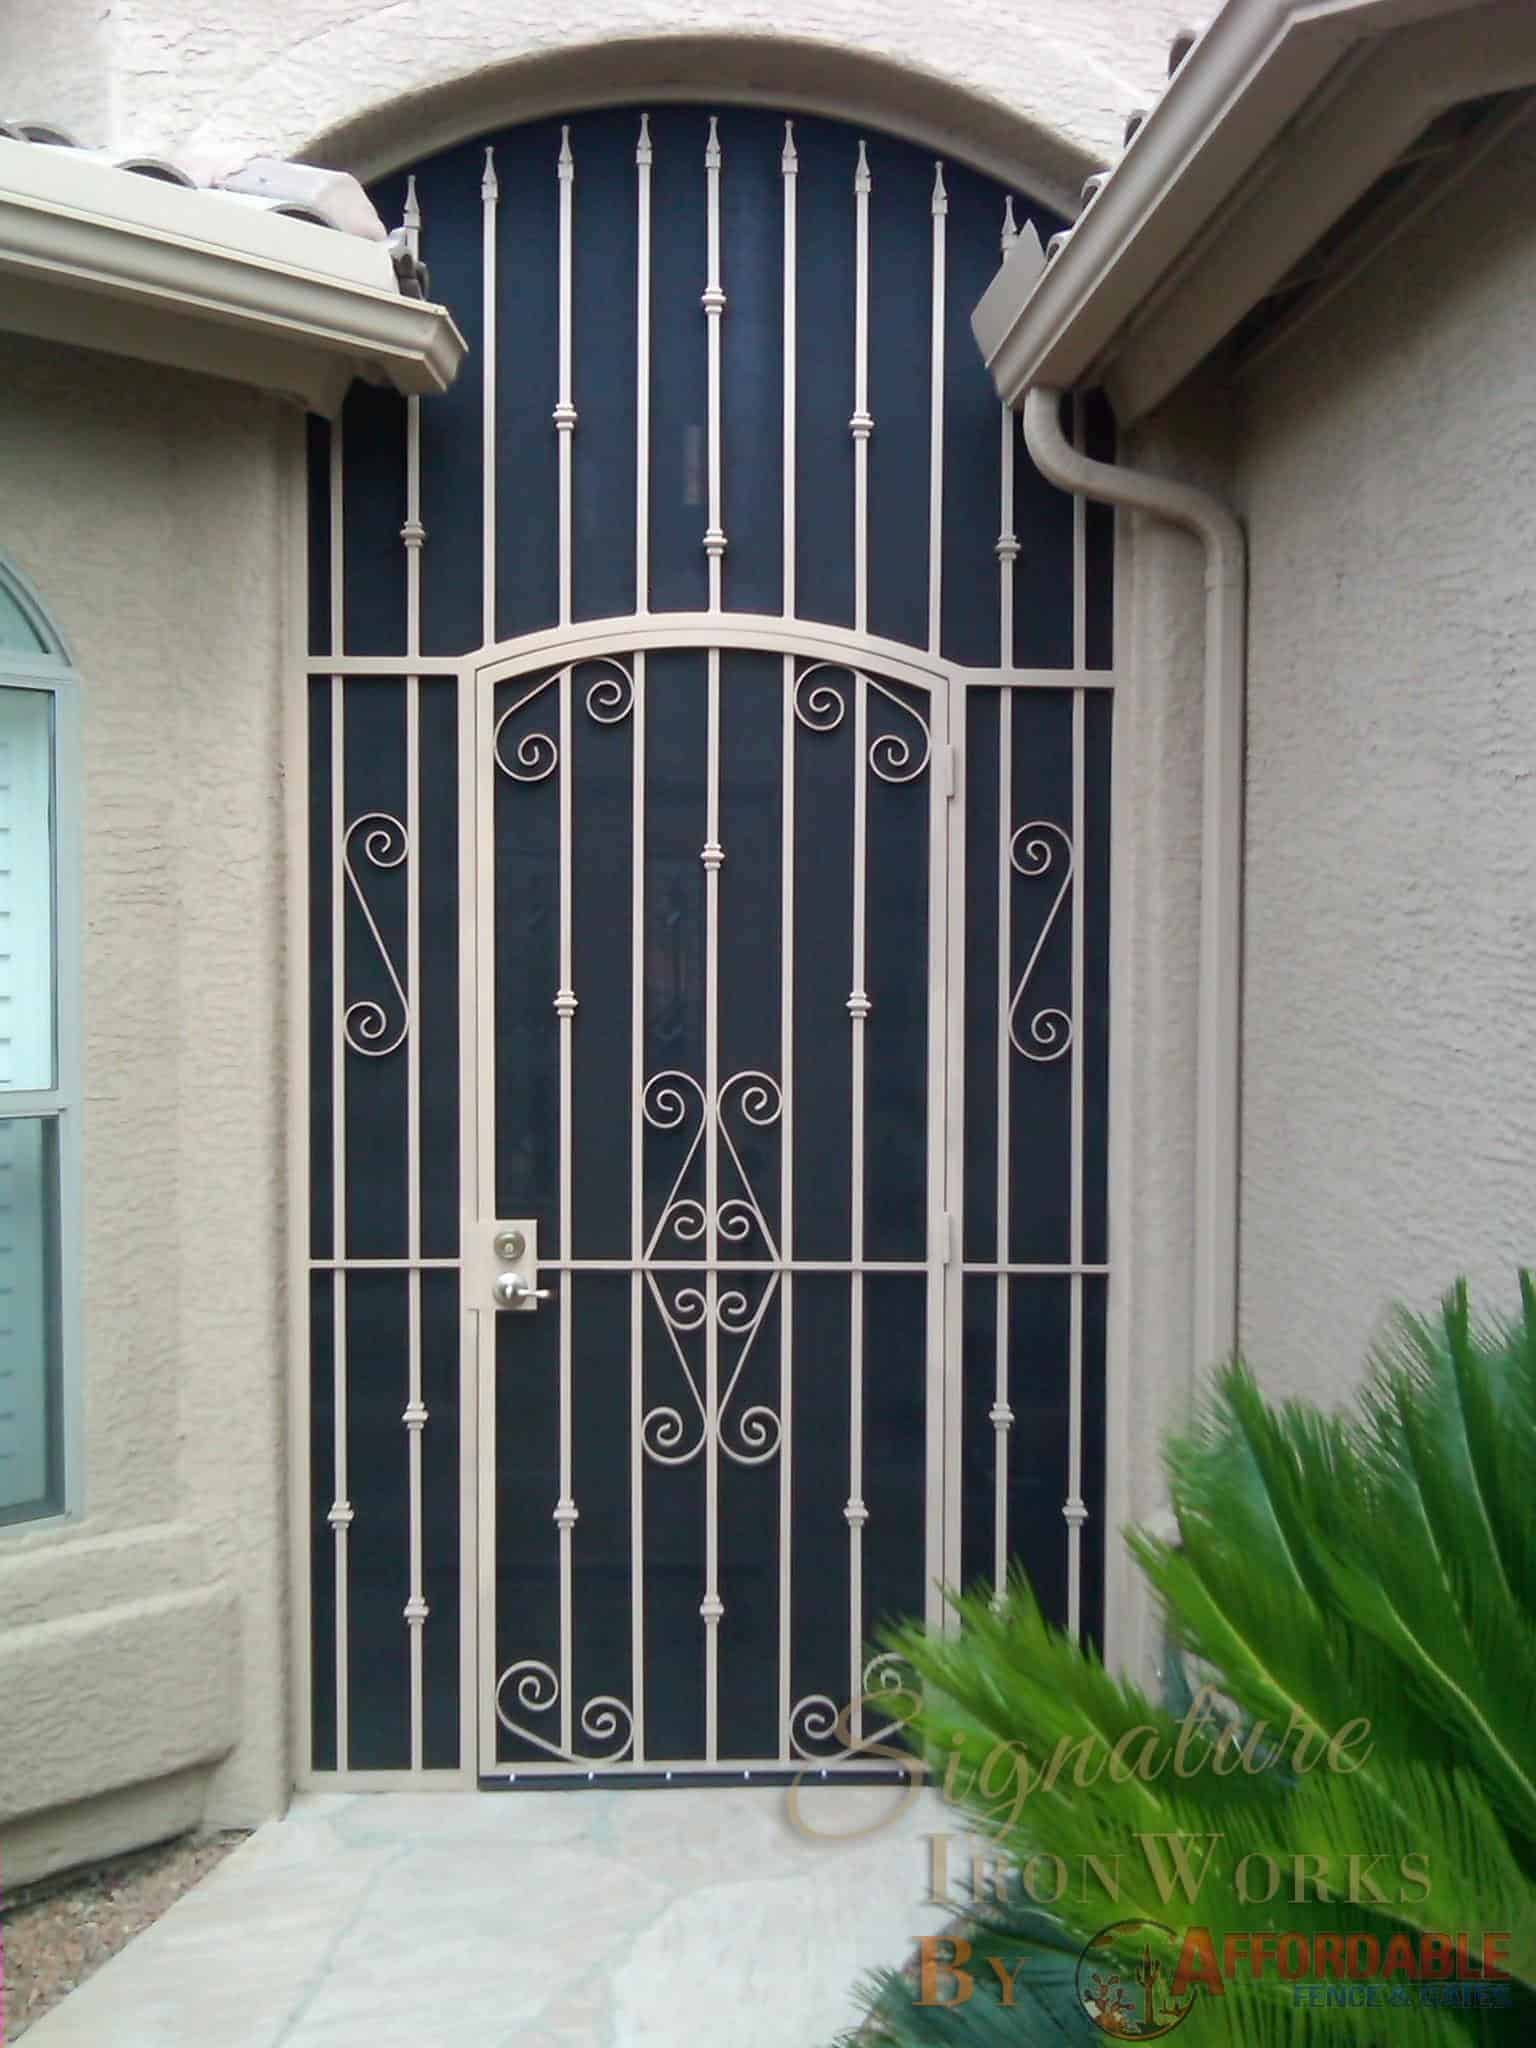 Security door enclosure with 3 panels - Painted and decorated with swirls 5000 E - Installed in Tucson